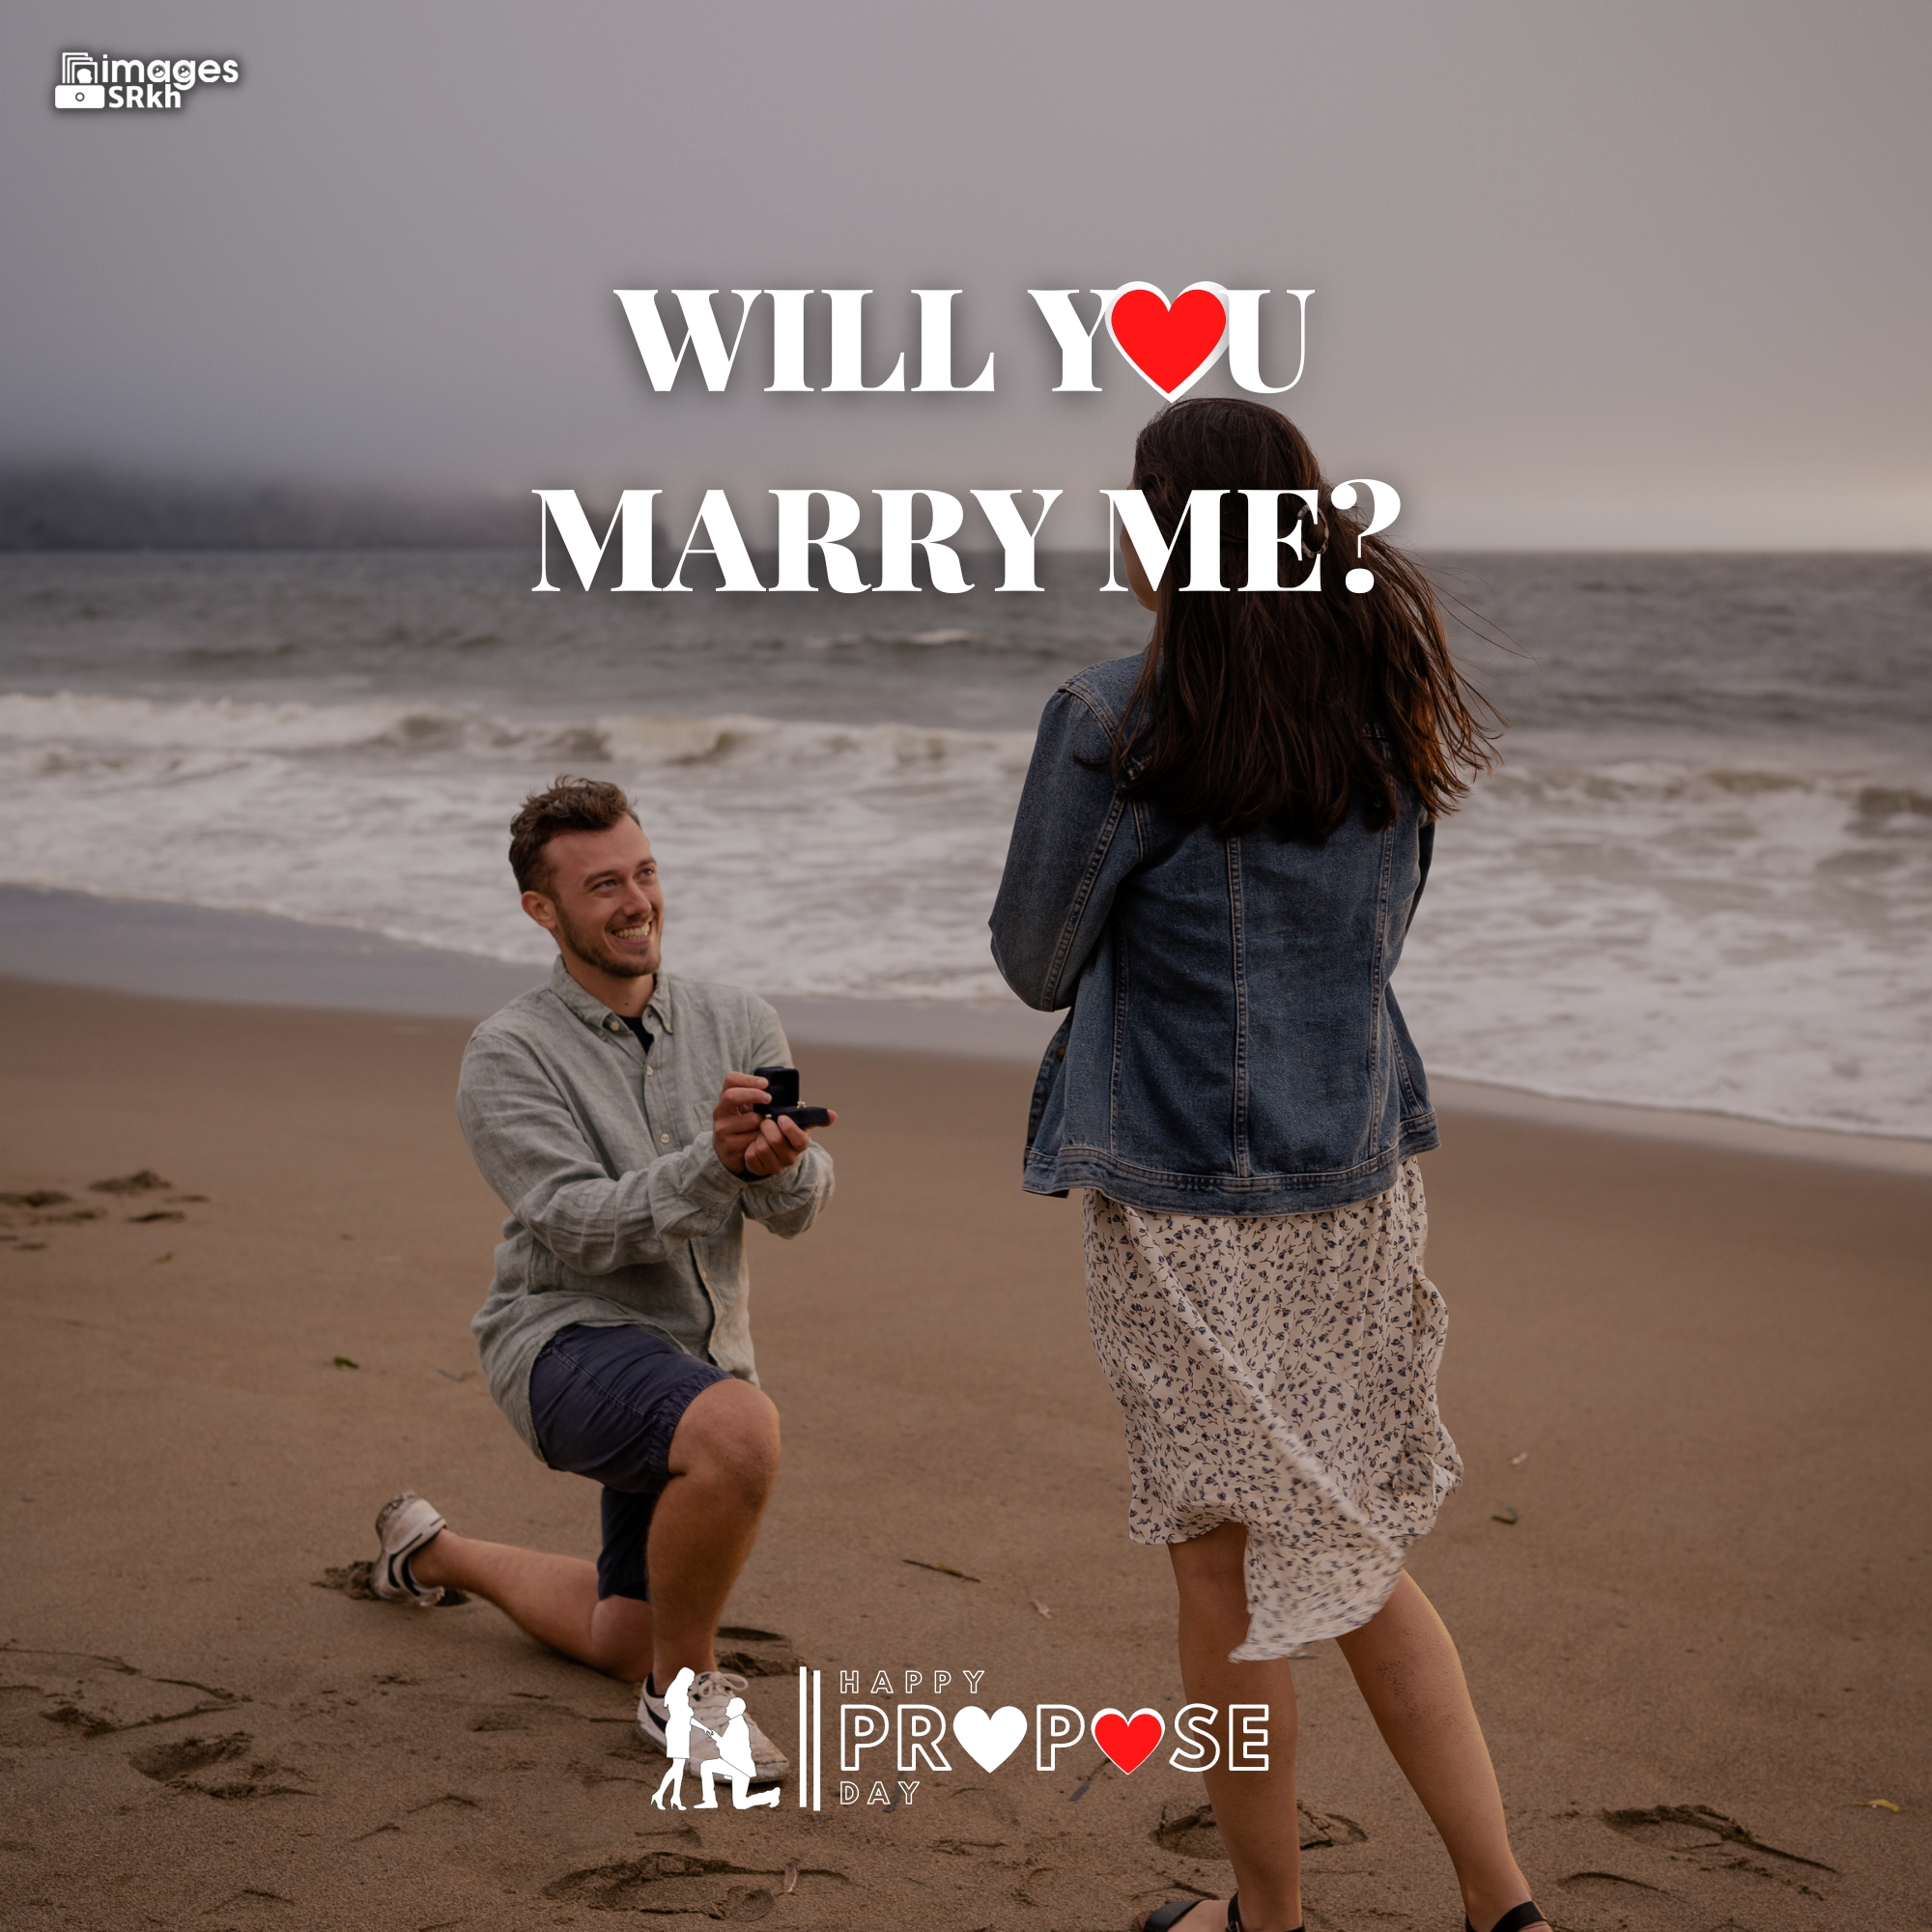 Propose Day Images | 259 | Will You MARRY ME